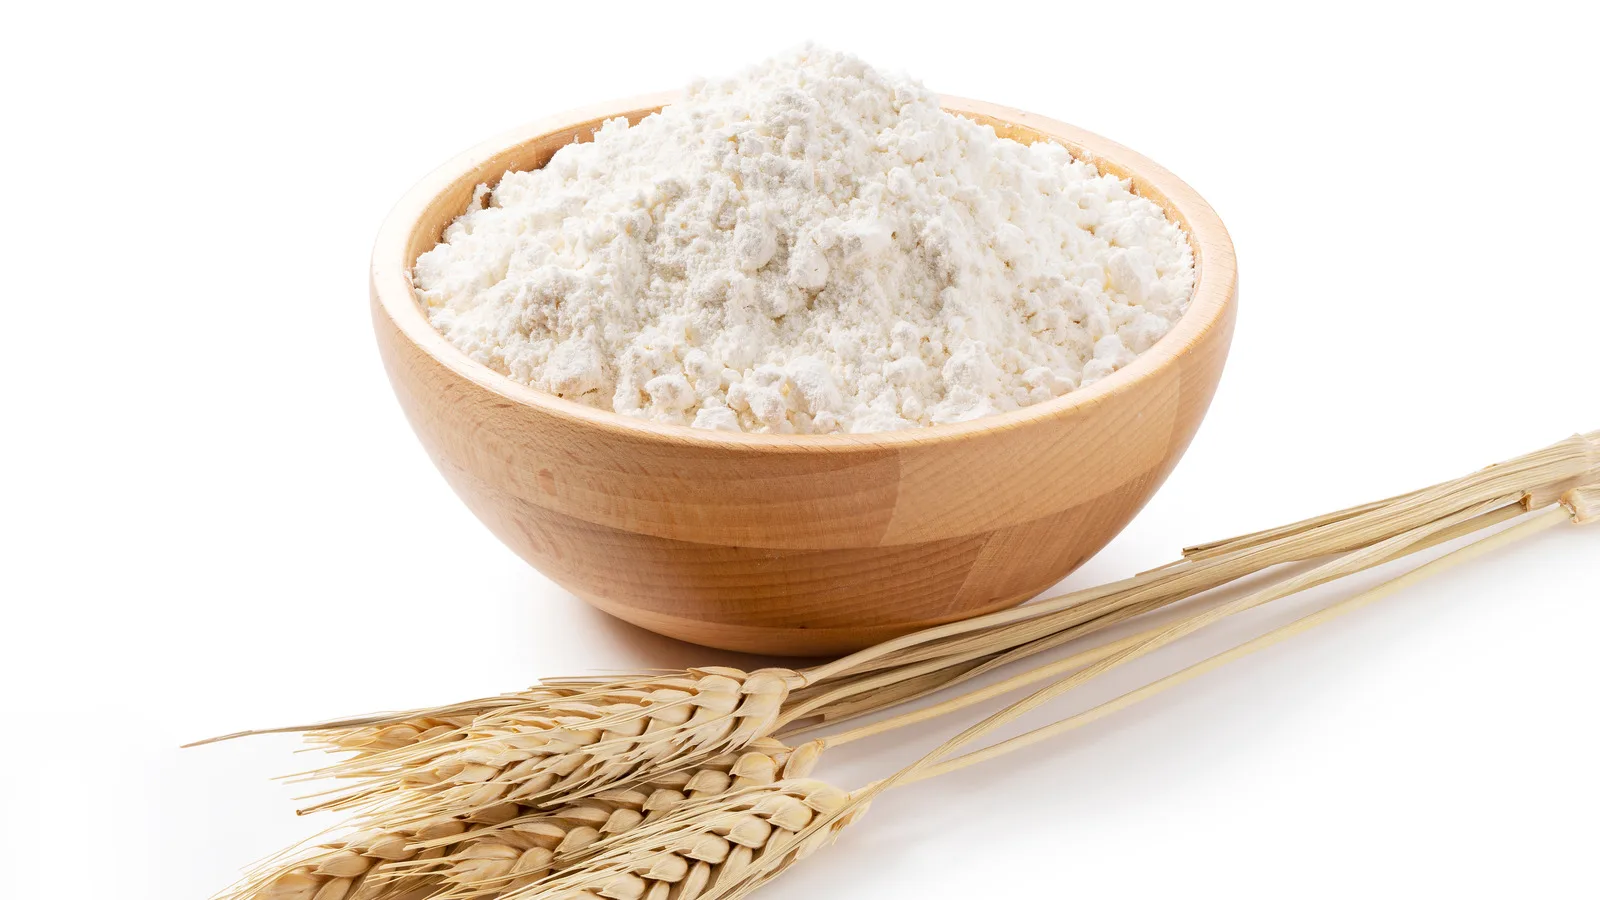 Great quality white wheat flour product\ All-Purpose Flour